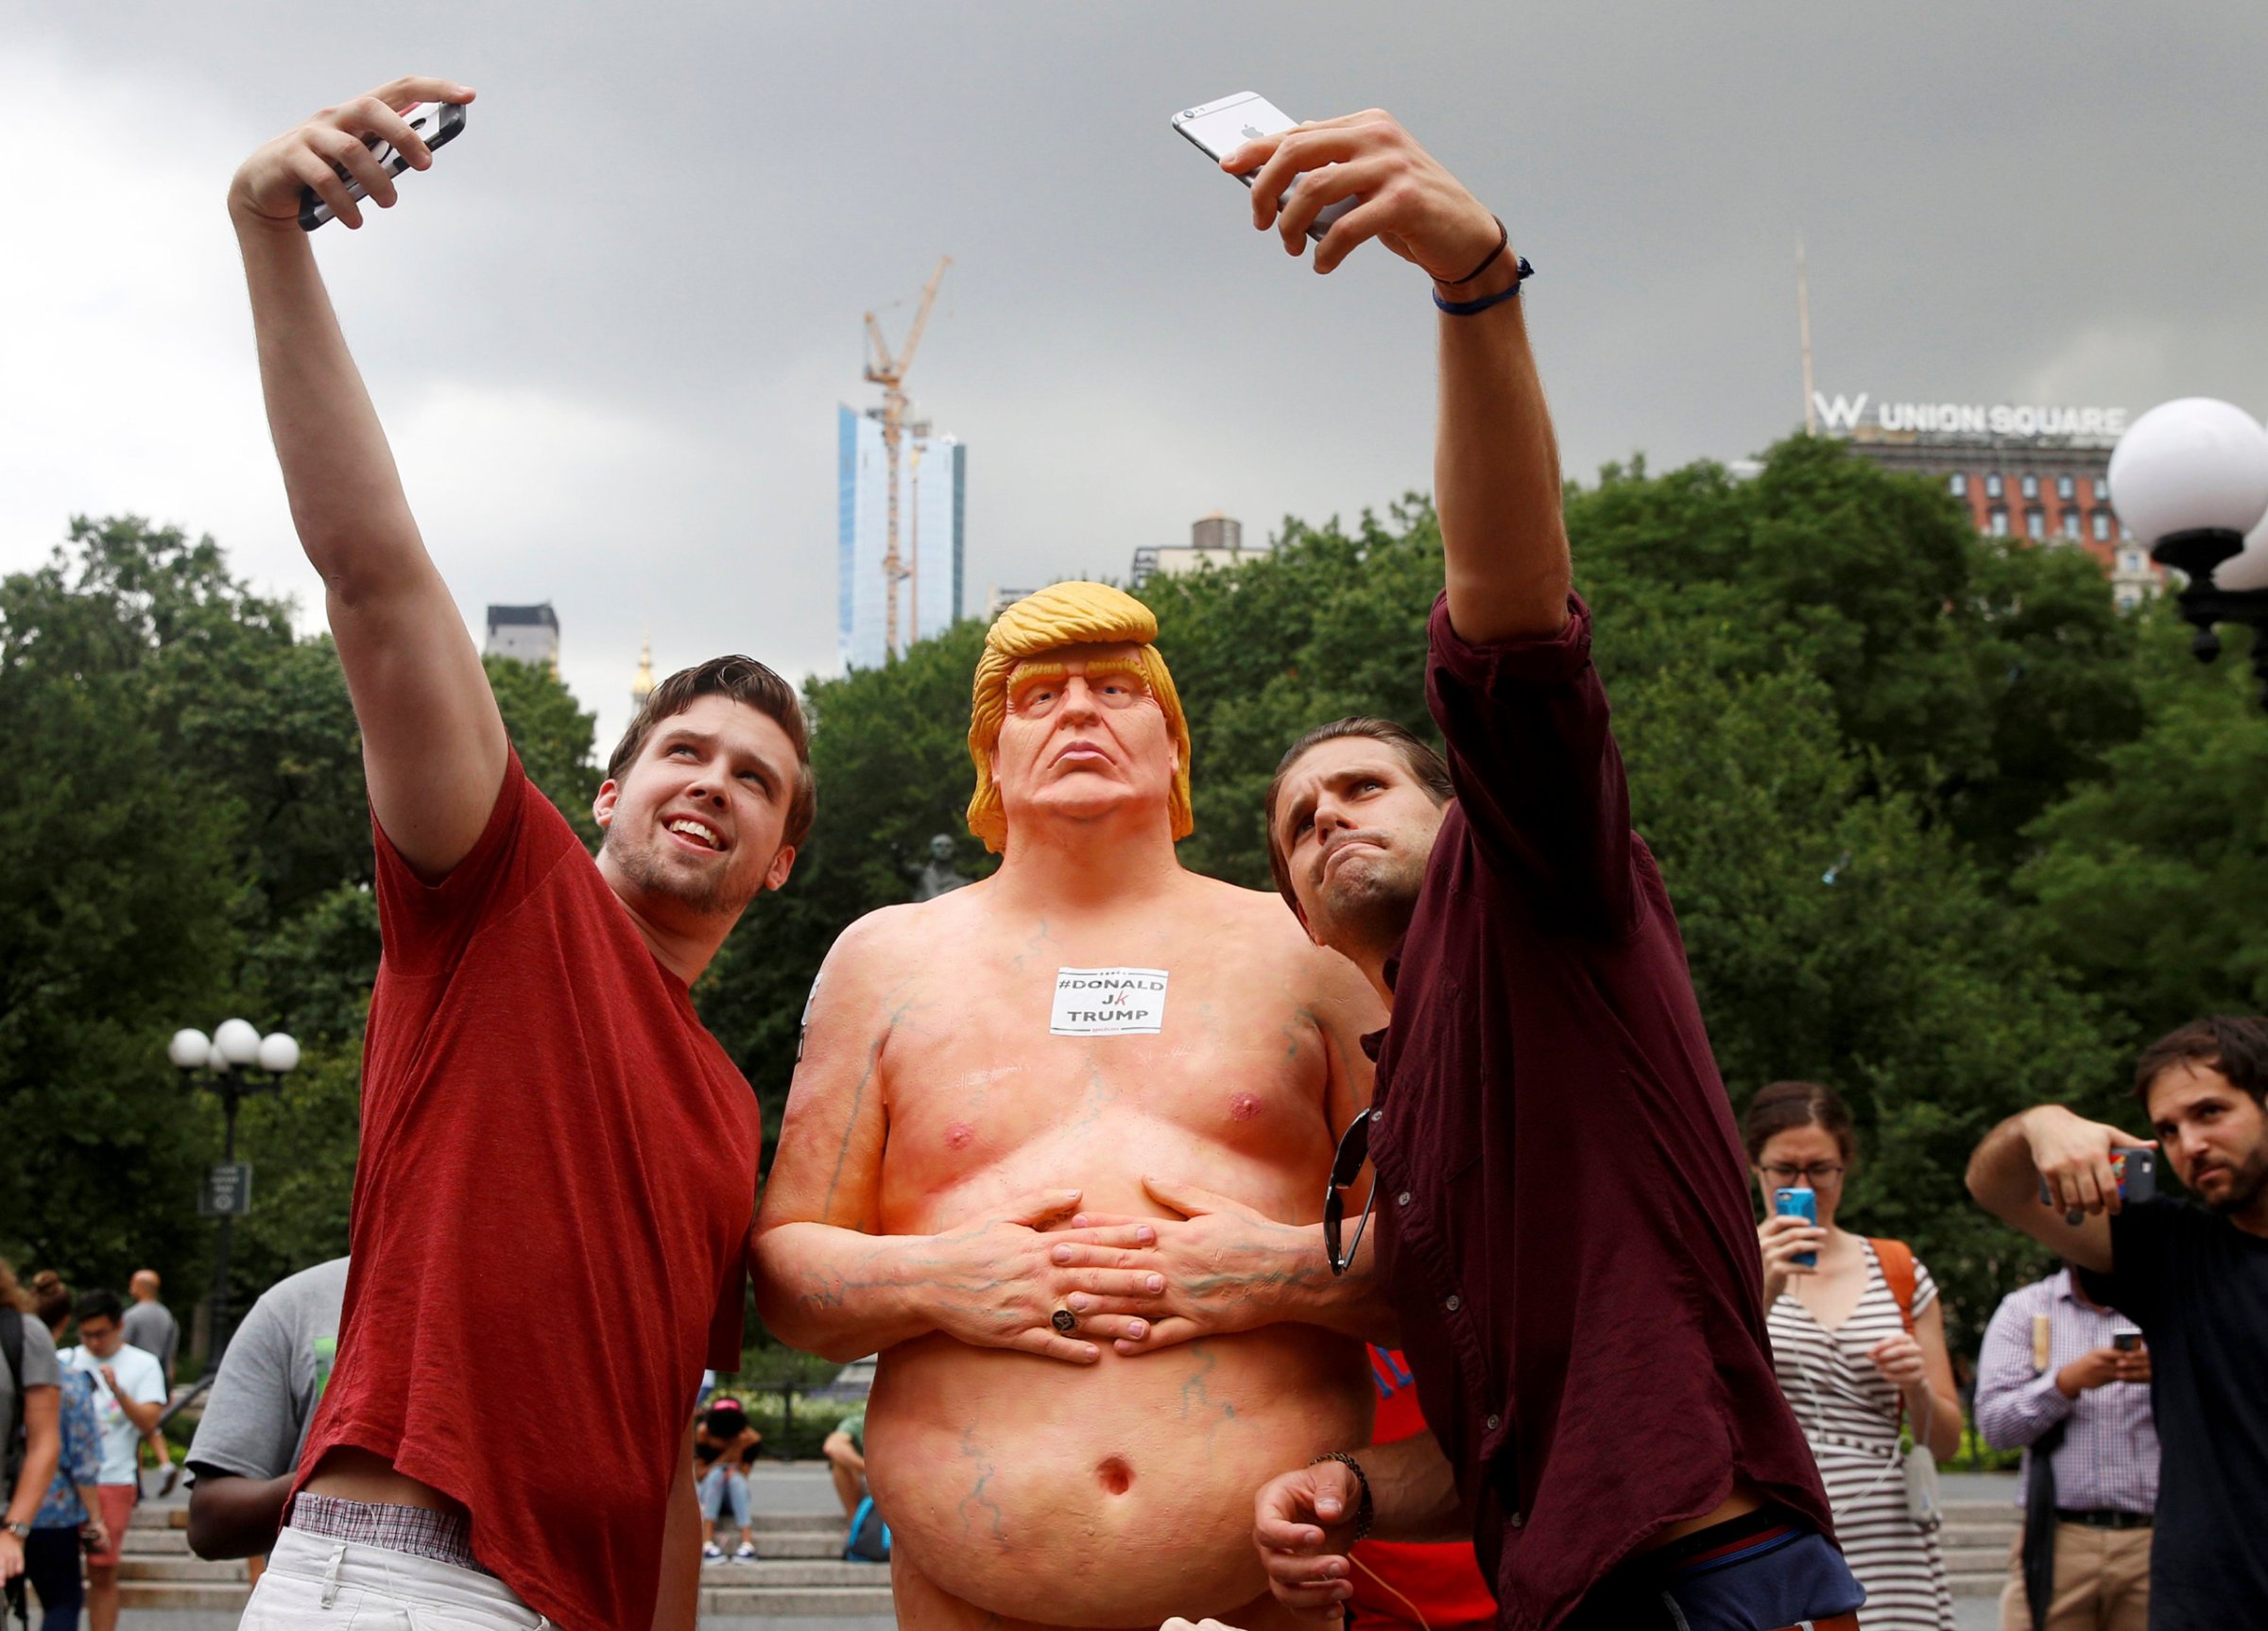 People pose for selfies with a naked statue of U.S. Republican presidential nominee Donald Trump that was left in Union Square Park in New York City on Aug. 18, 2016.